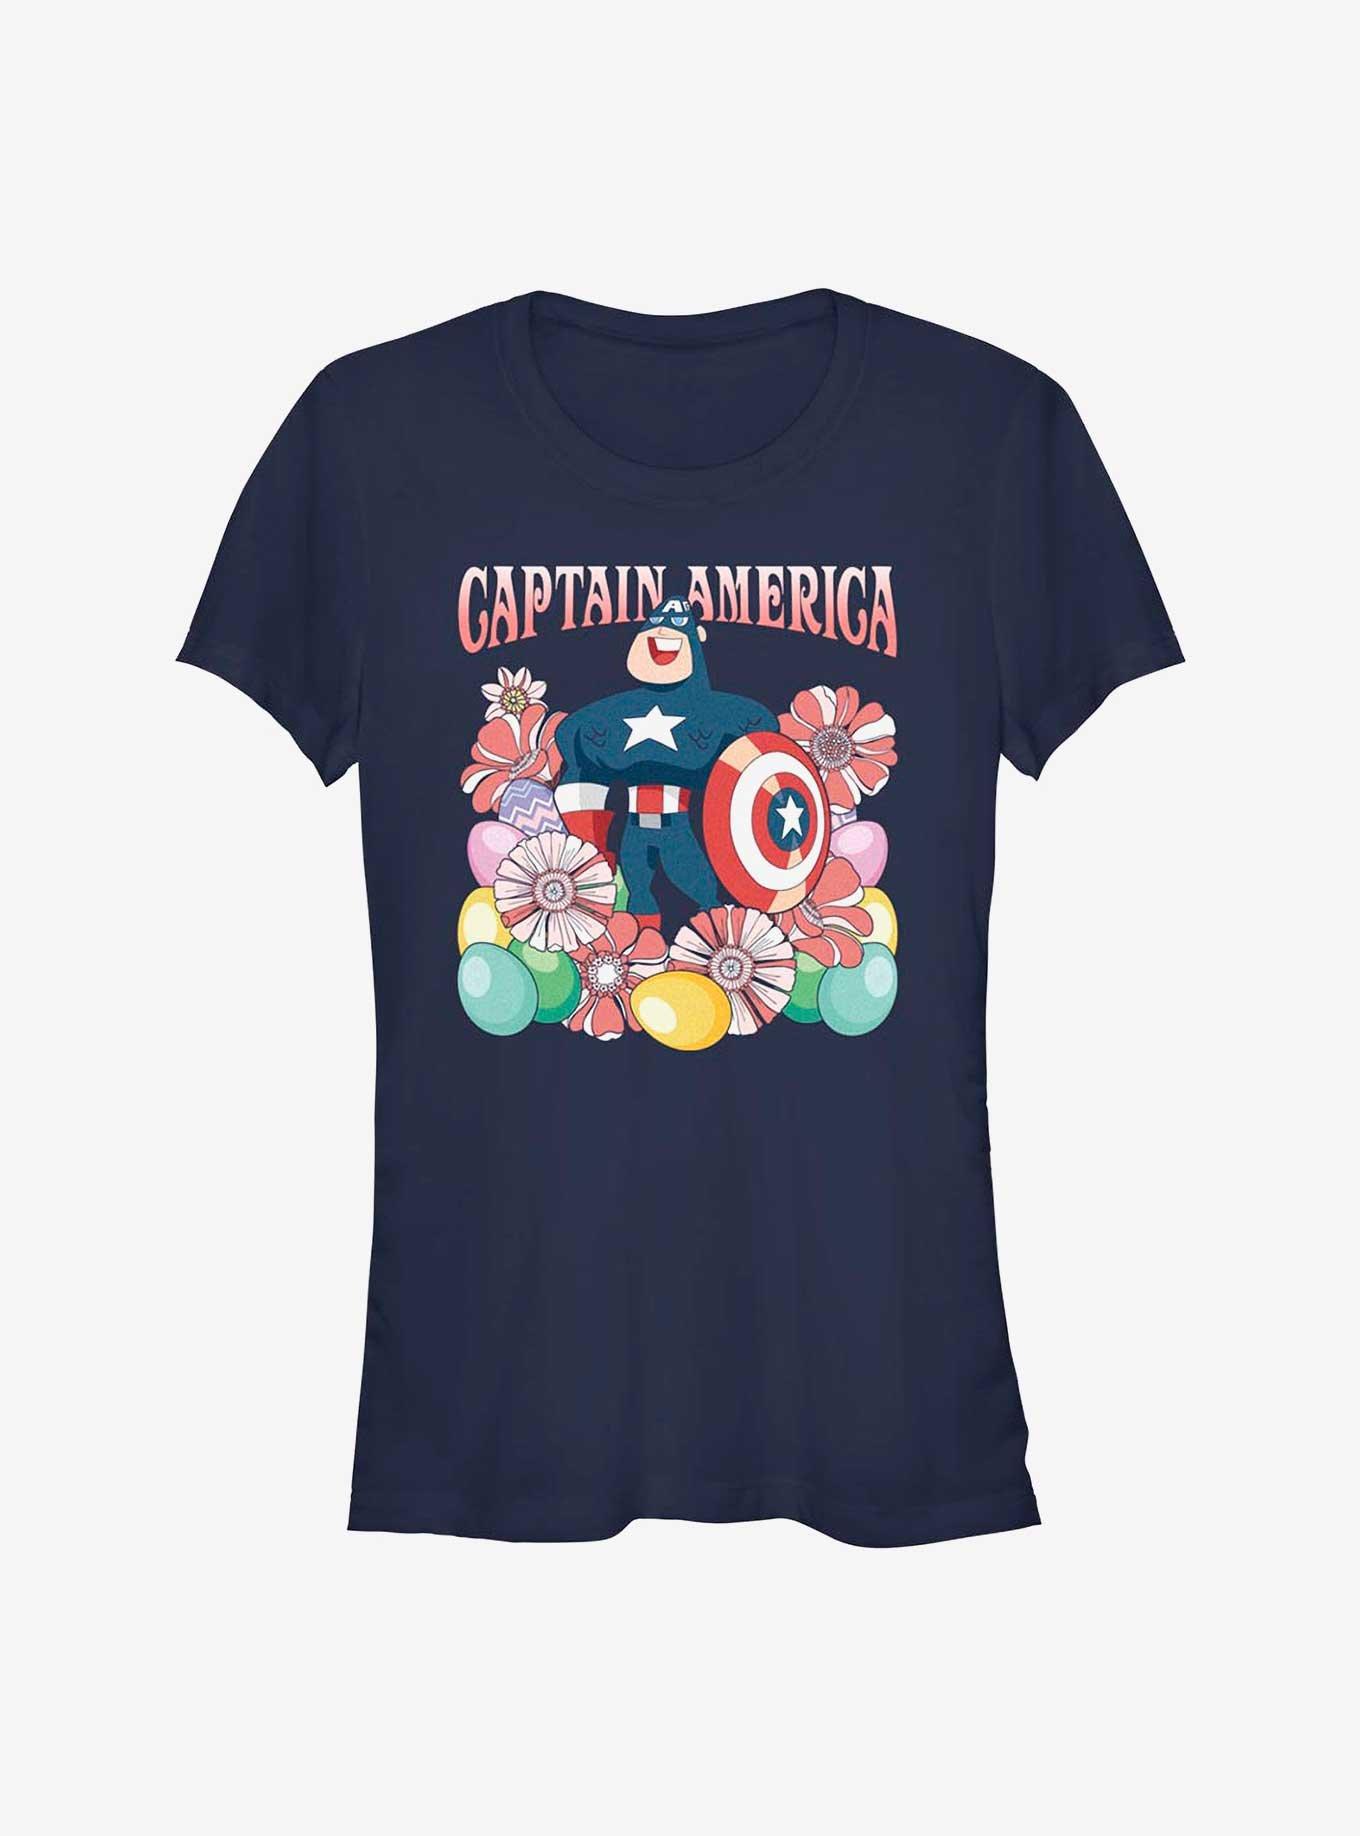 Marvel Captain America Collecting Eggs Since '41 Girls T-Shirt, NAVY, hi-res